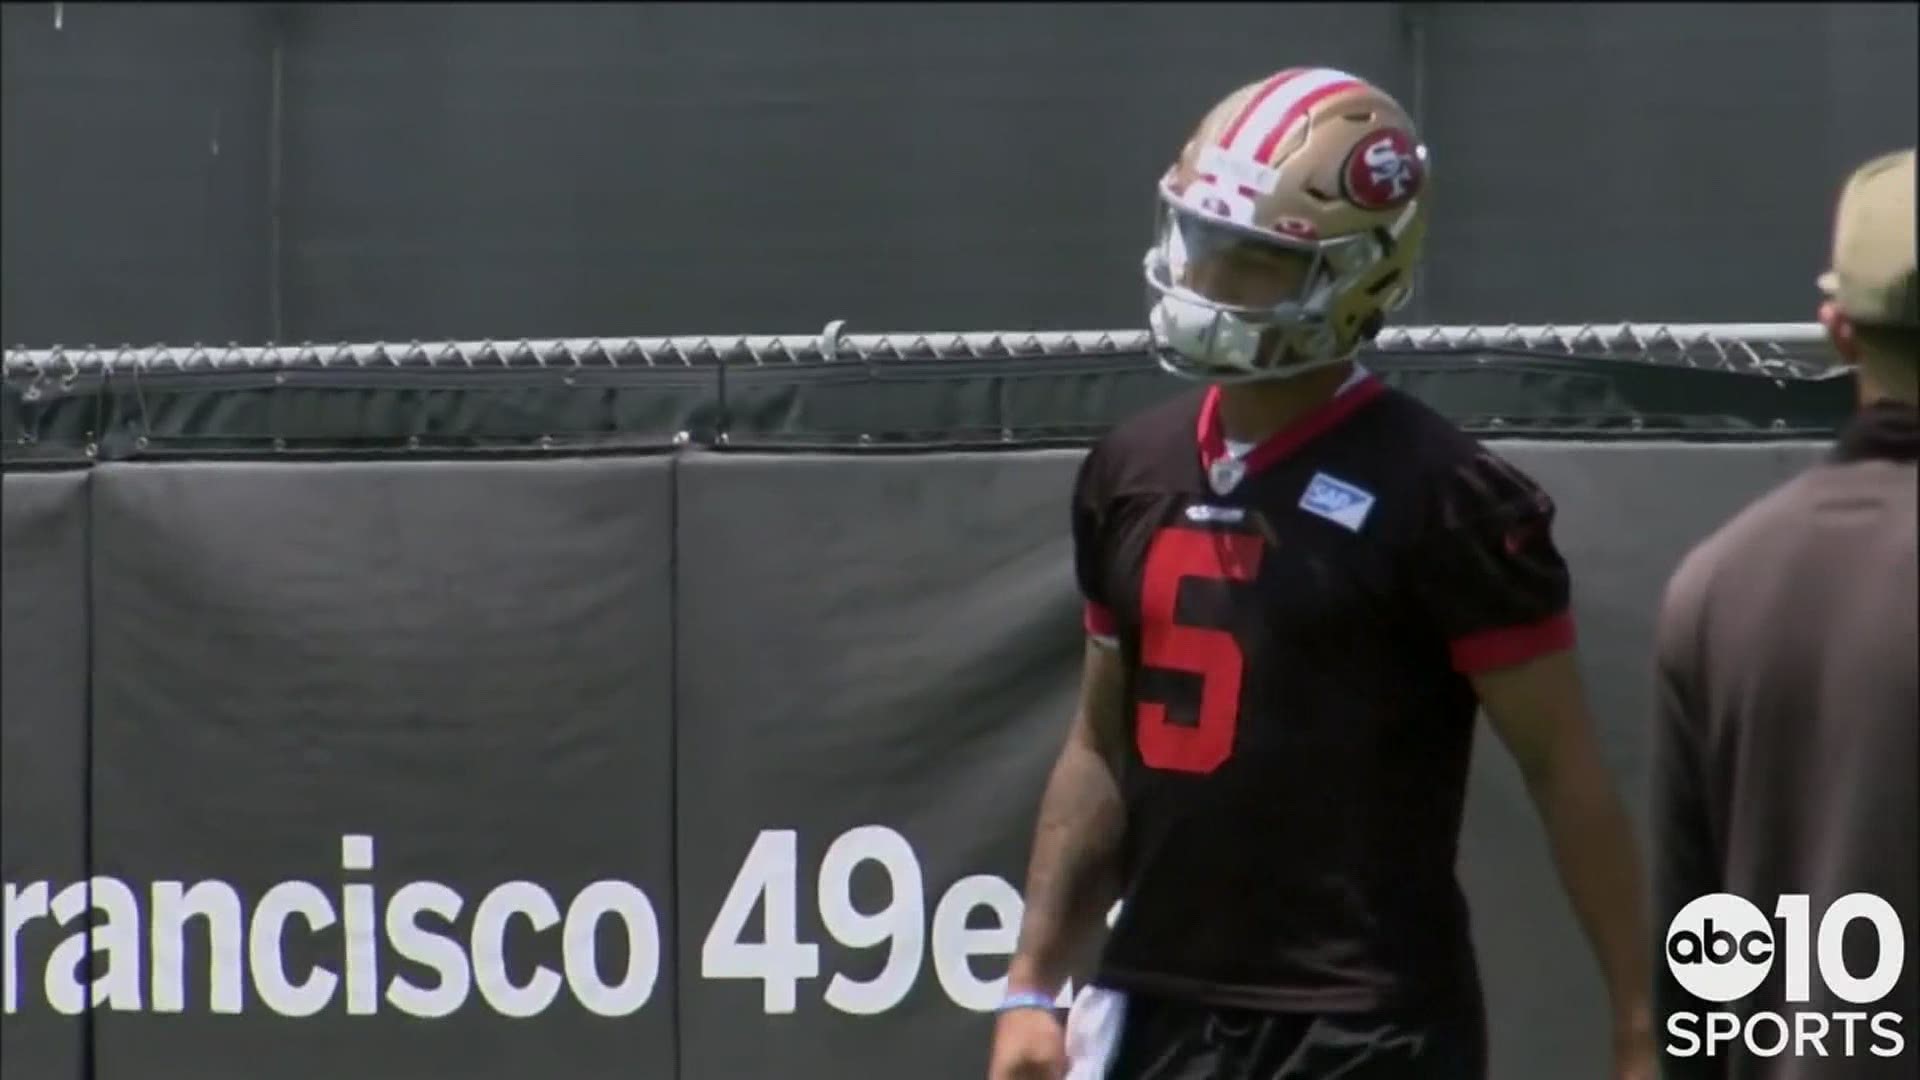 Donning a San Francisco 49ers jersey for the first time, rookie QB Trey Lance takes to the practice field for minicamp in Santa Clara & give impressions of new team.